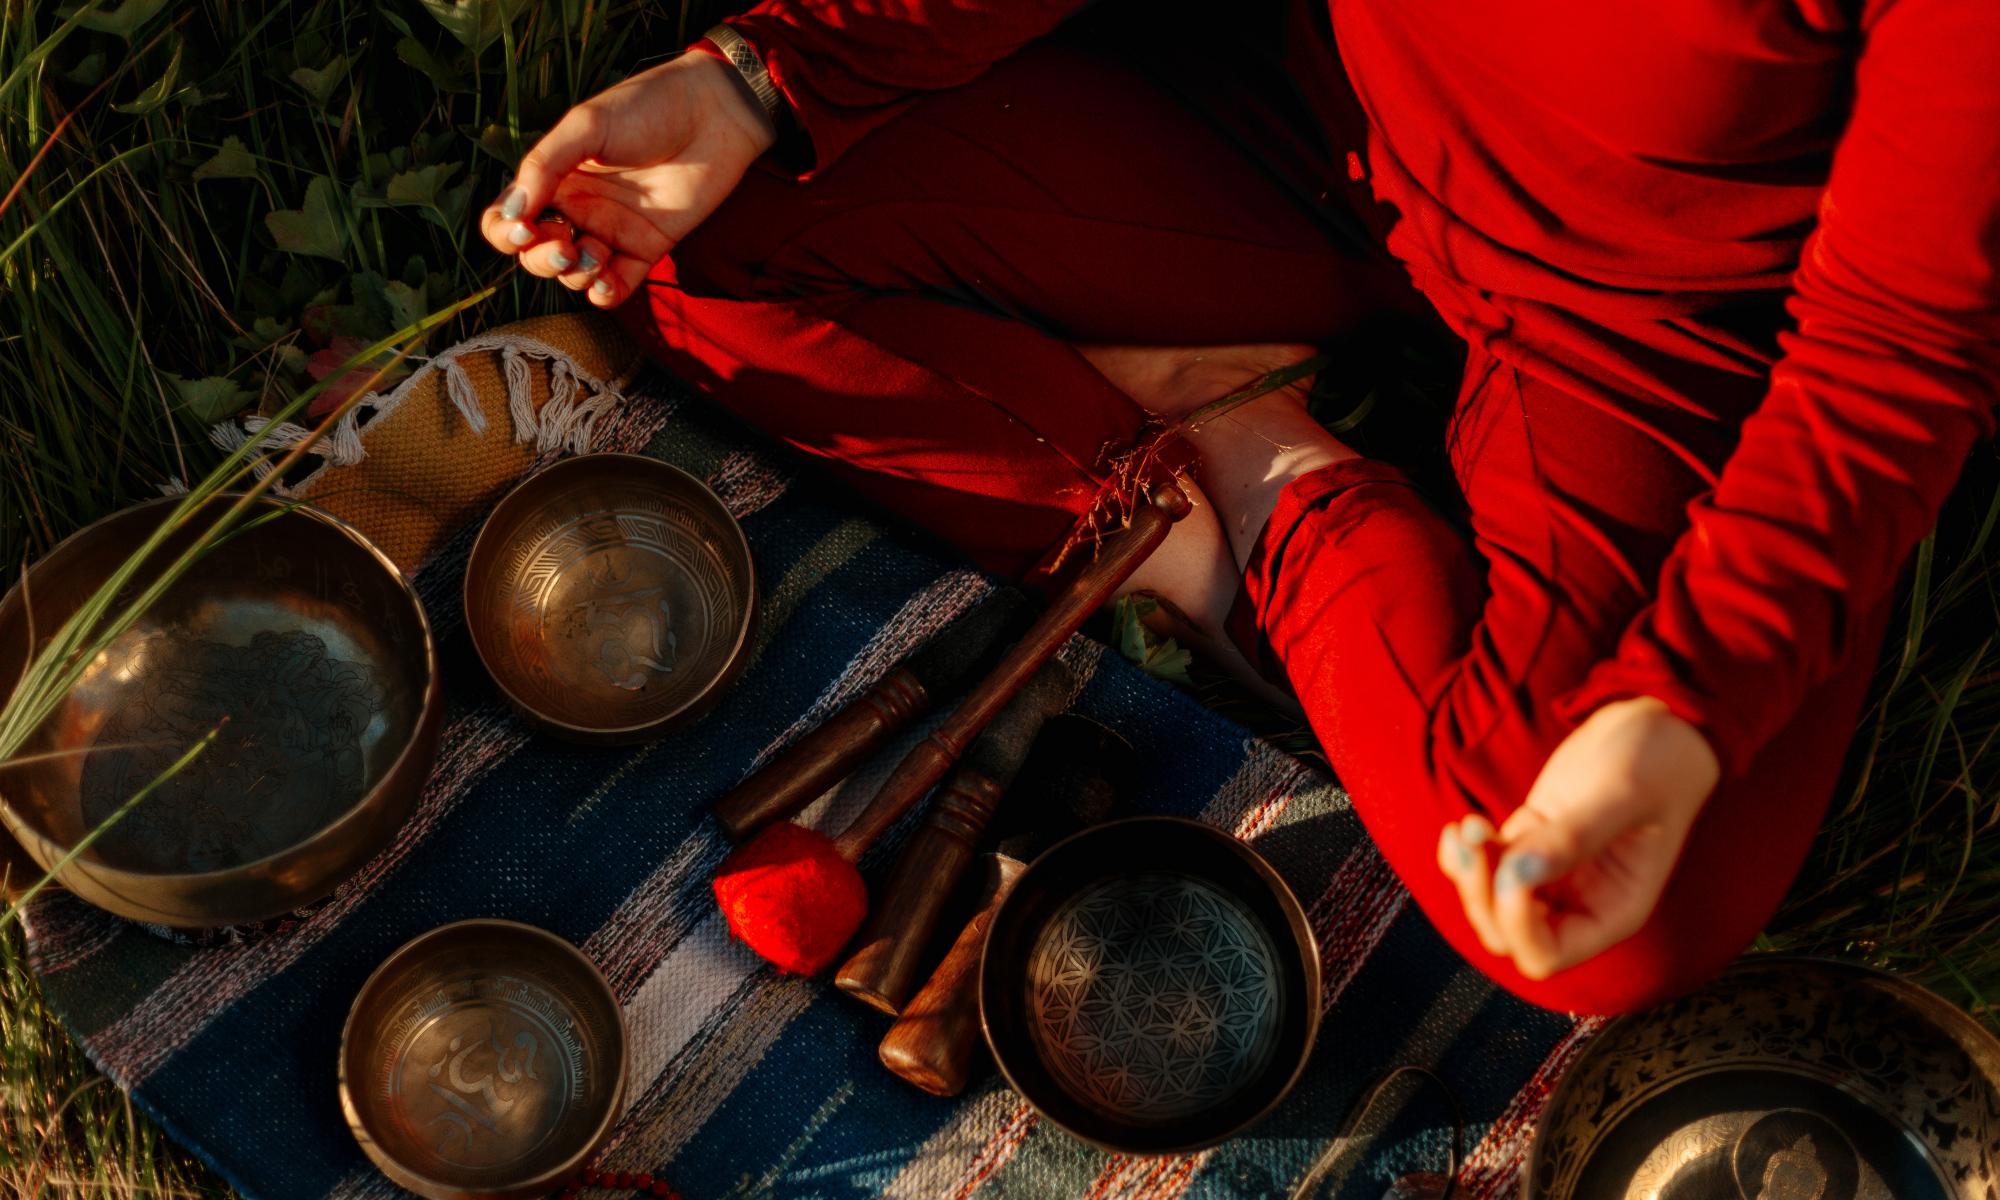 A person wearing red clothes sitting with their legs cross folded with bowls in front of them.	